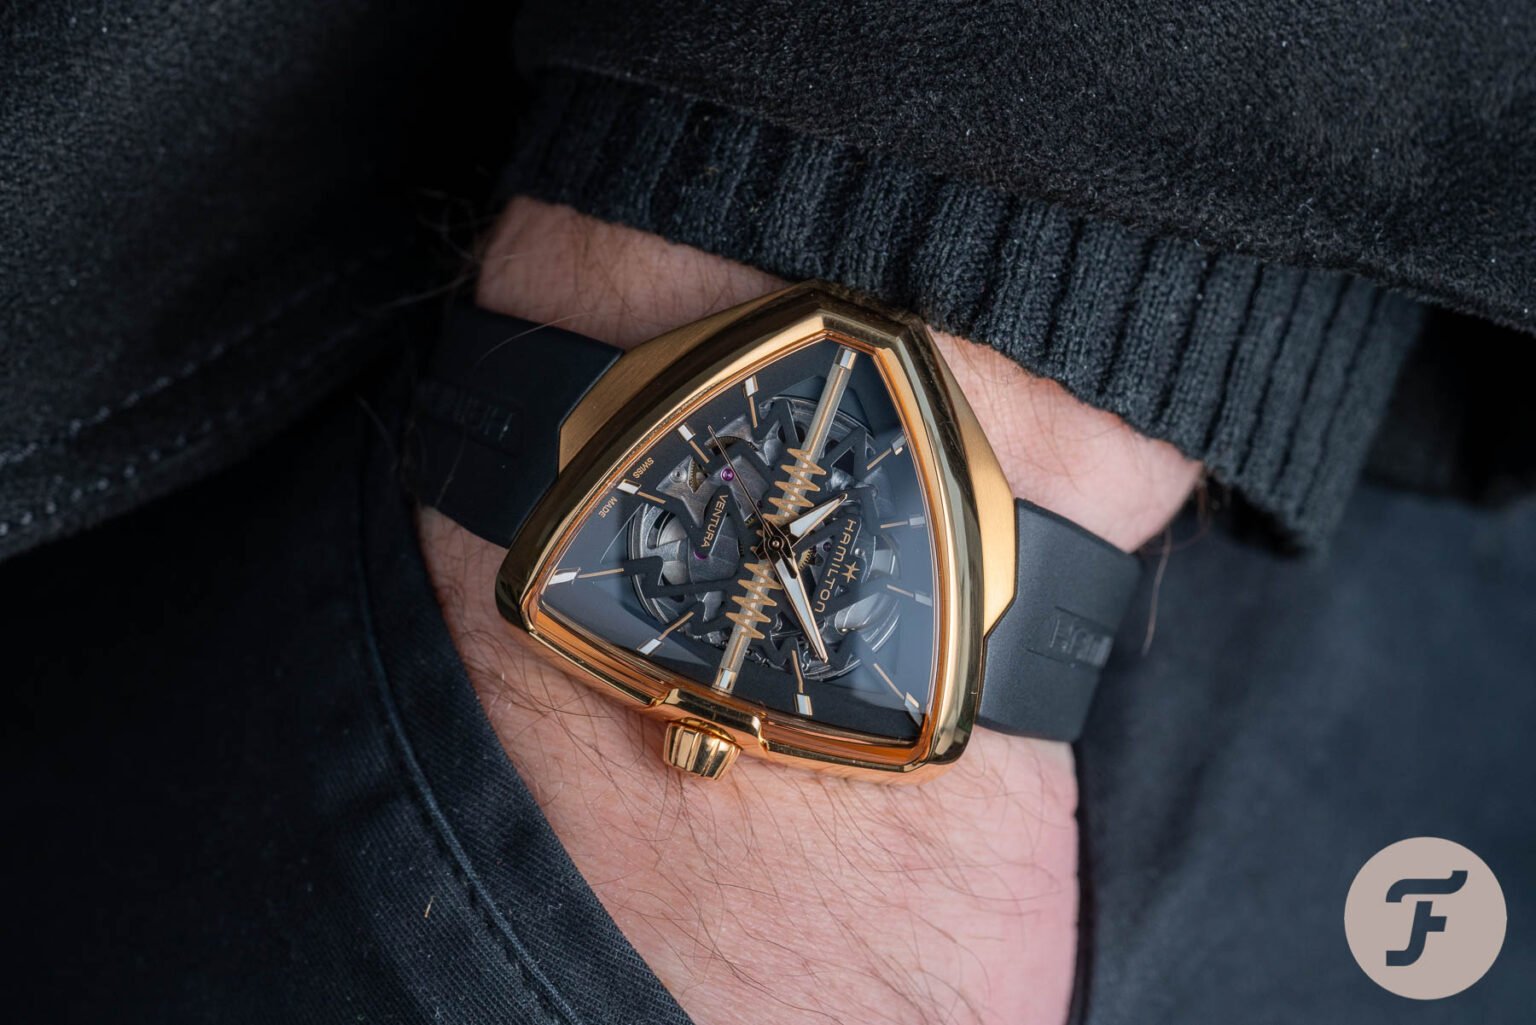 Hands-On With The New Hamilton Ventura Elvis80 Skeleton Watches